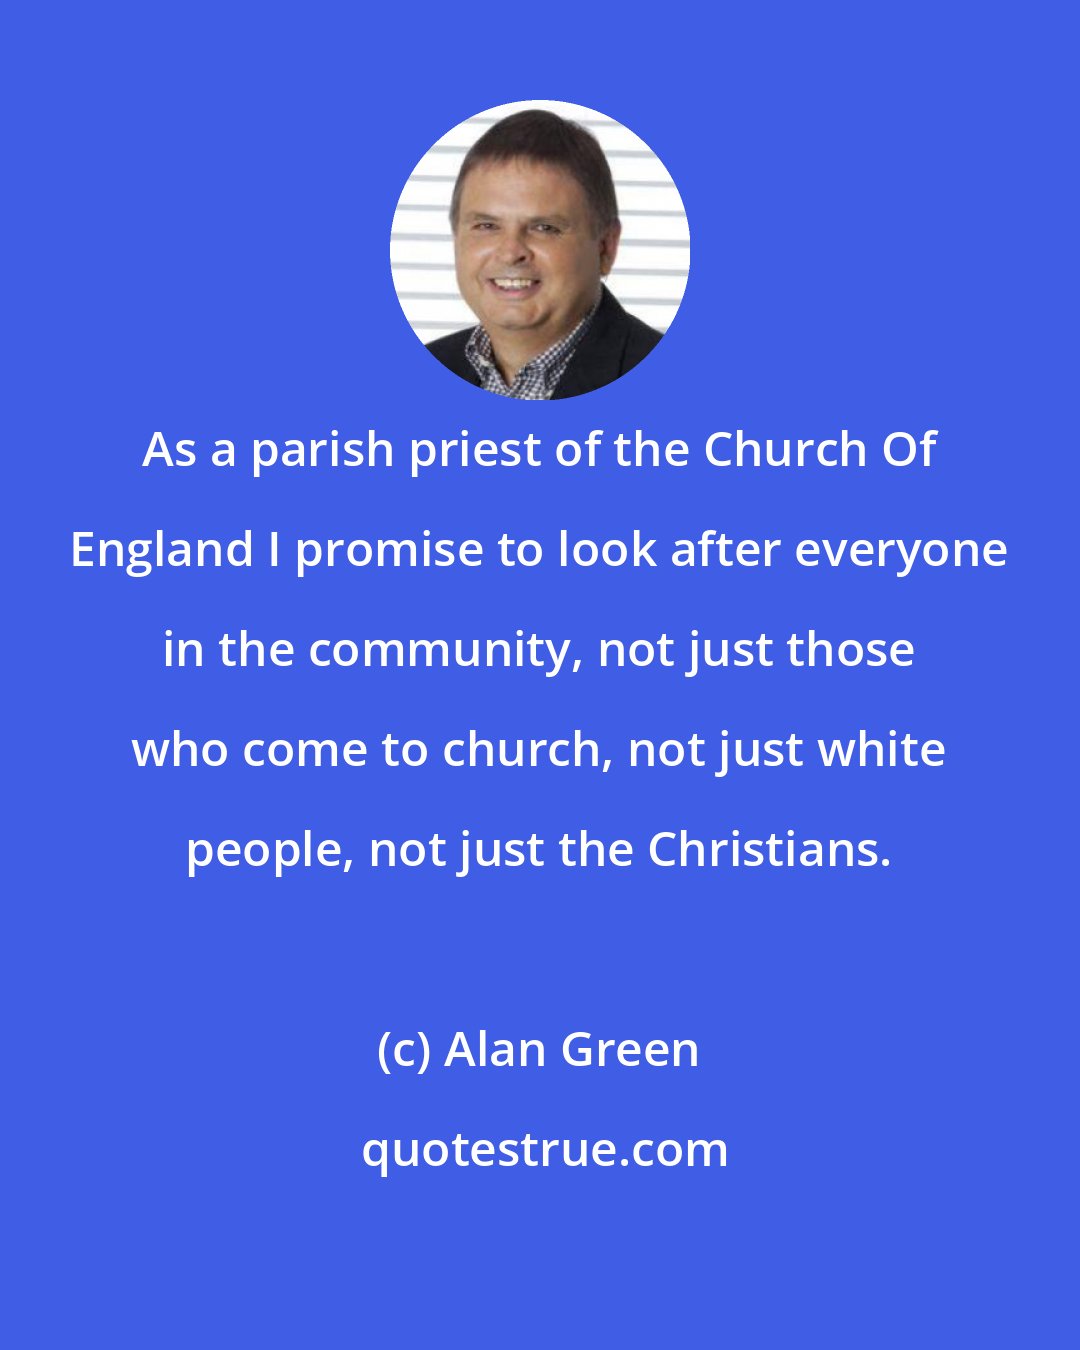 Alan Green: As a parish priest of the Church Of England I promise to look after everyone in the community, not just those who come to church, not just white people, not just the Christians.